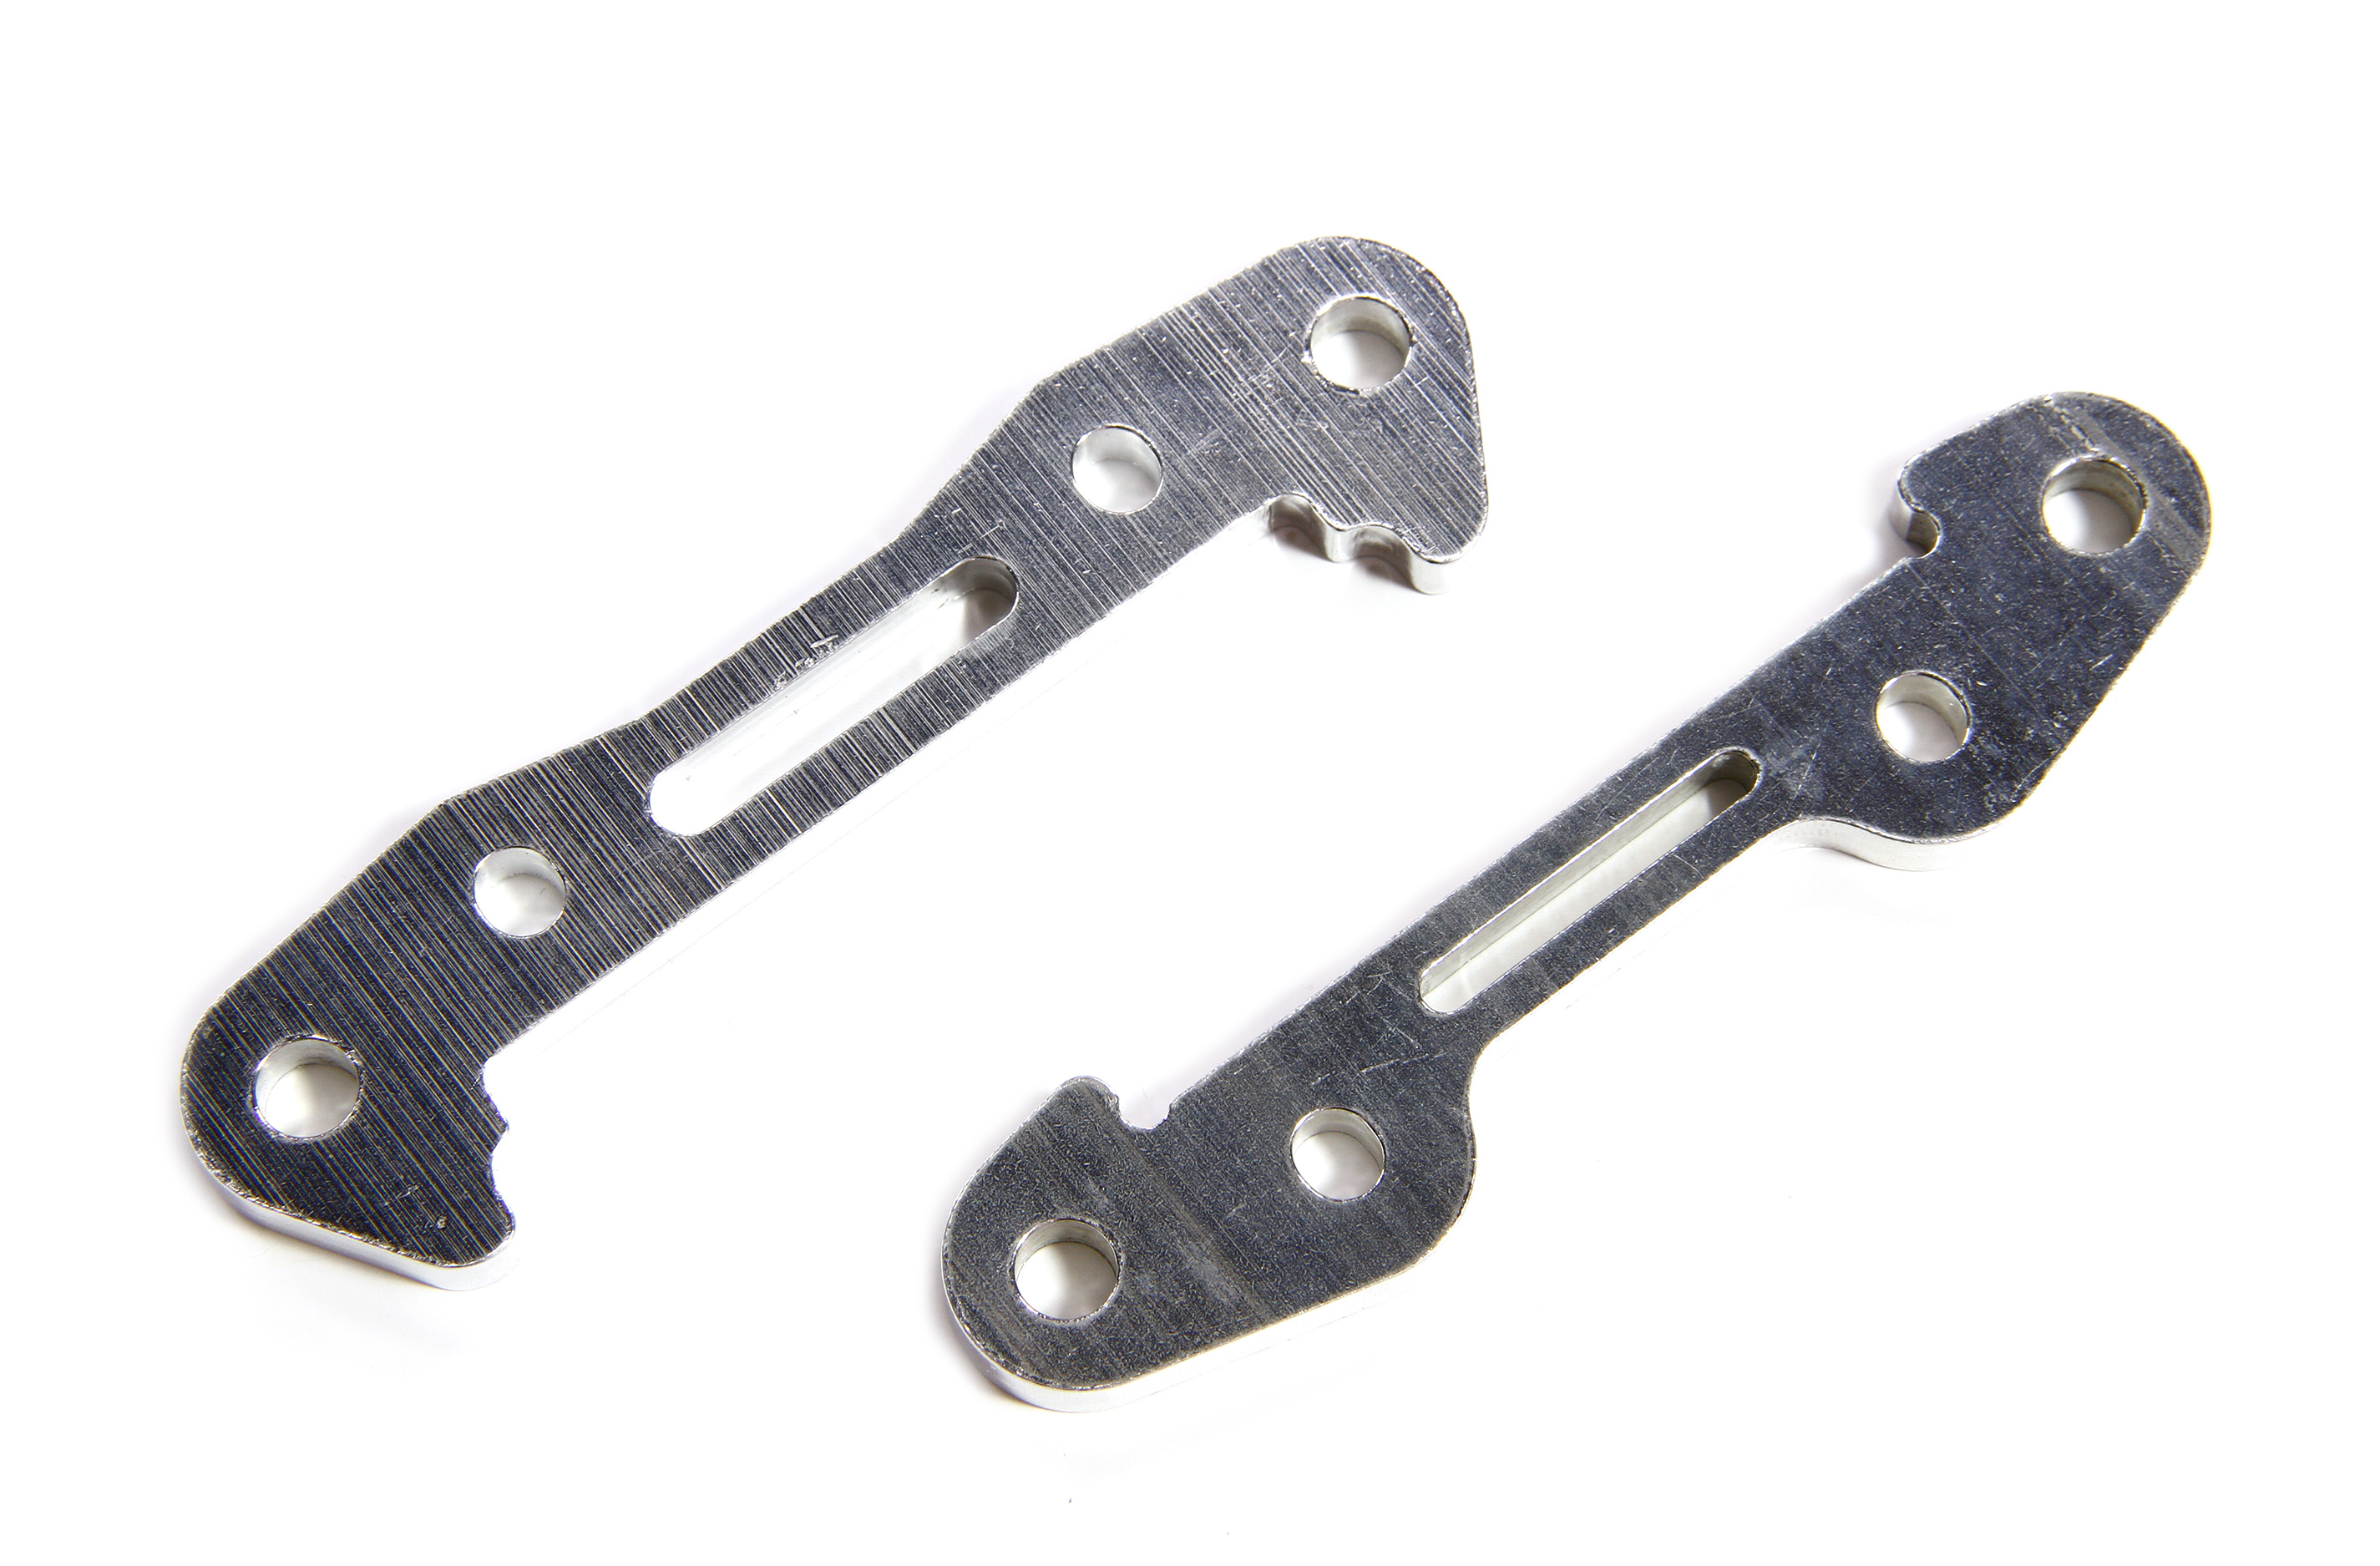 y1475 Special front hinge pin brace set for Losi Mini